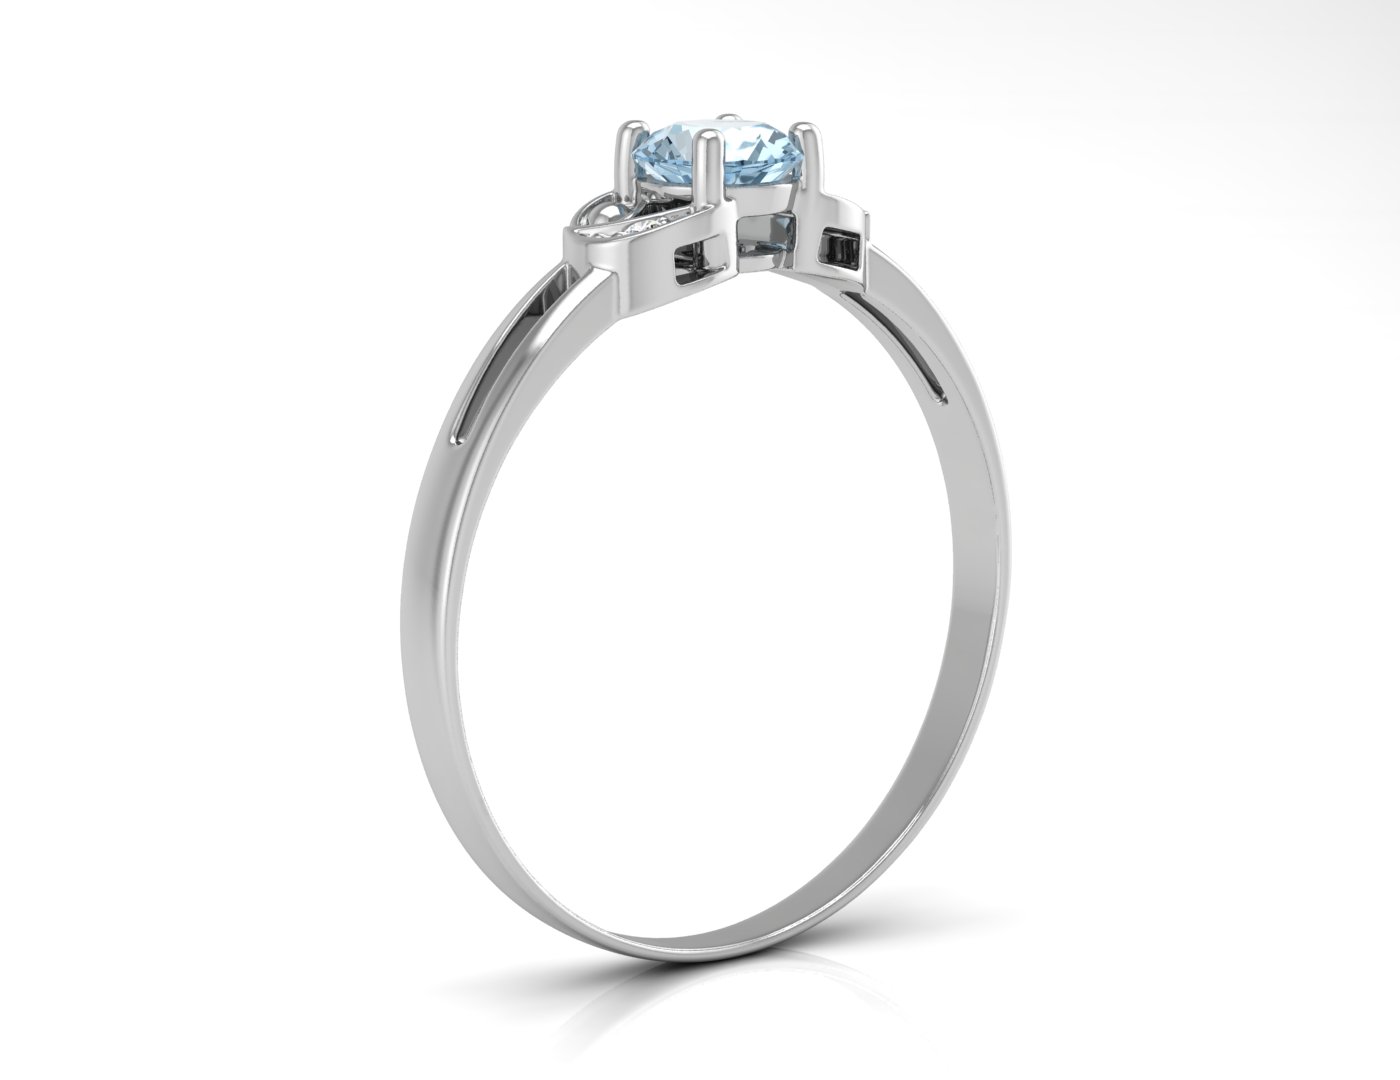 9k White Gold Fancy Cluster Diamond And Blue Topaz Ring 0.01 Carats - Image 2 of 4